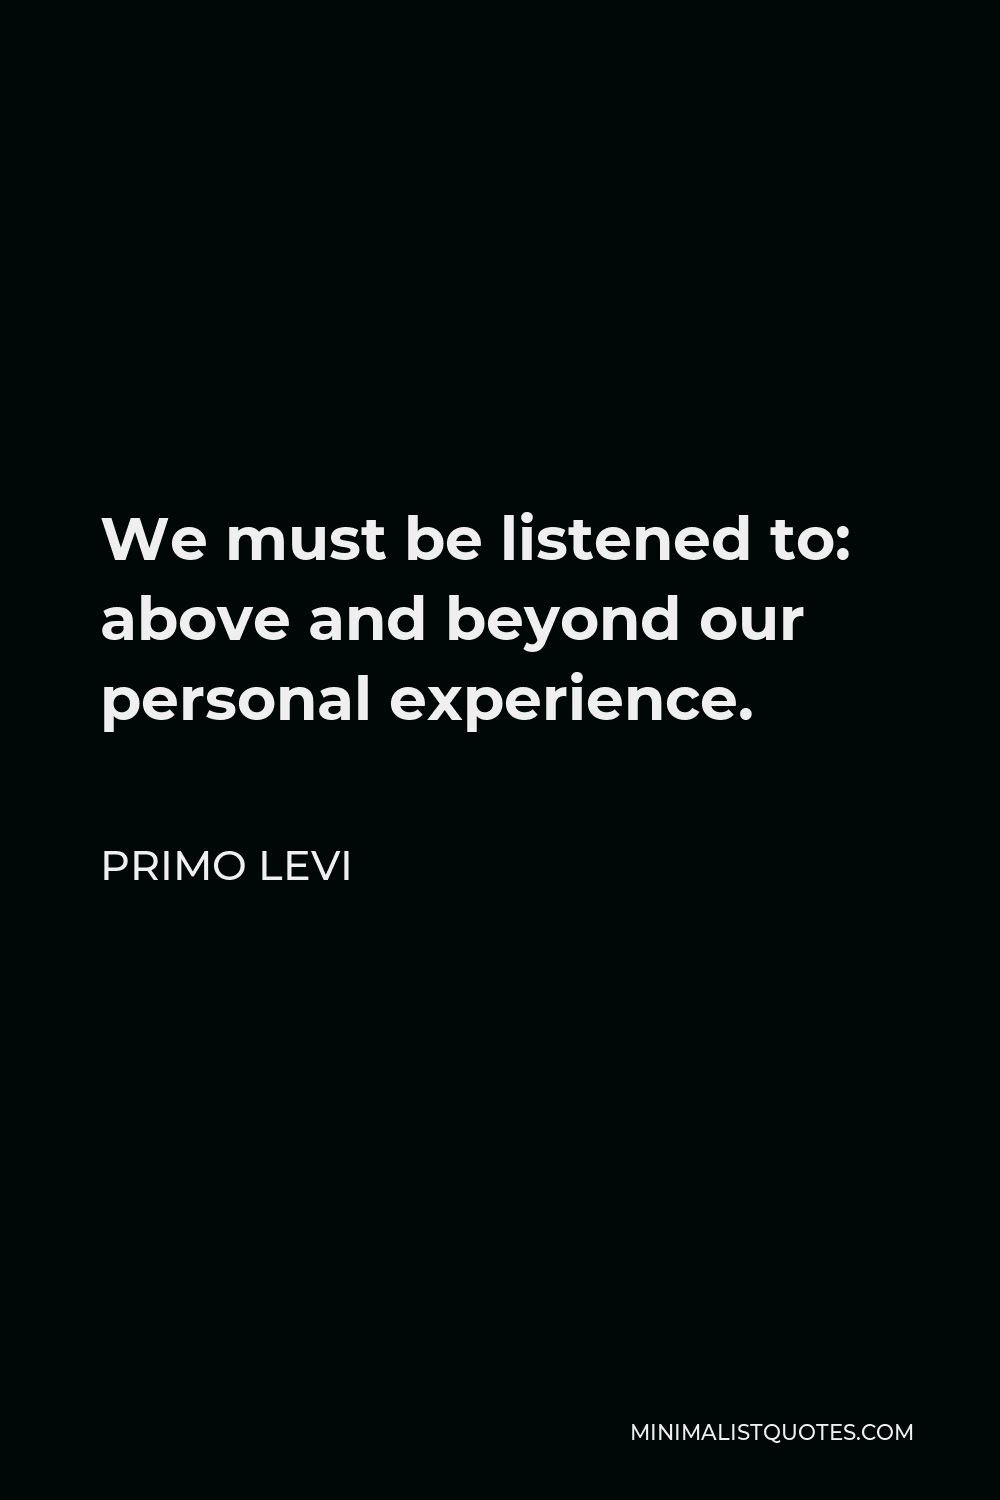 Primo Levi Quote - We must be listened to: above and beyond our personal experience.